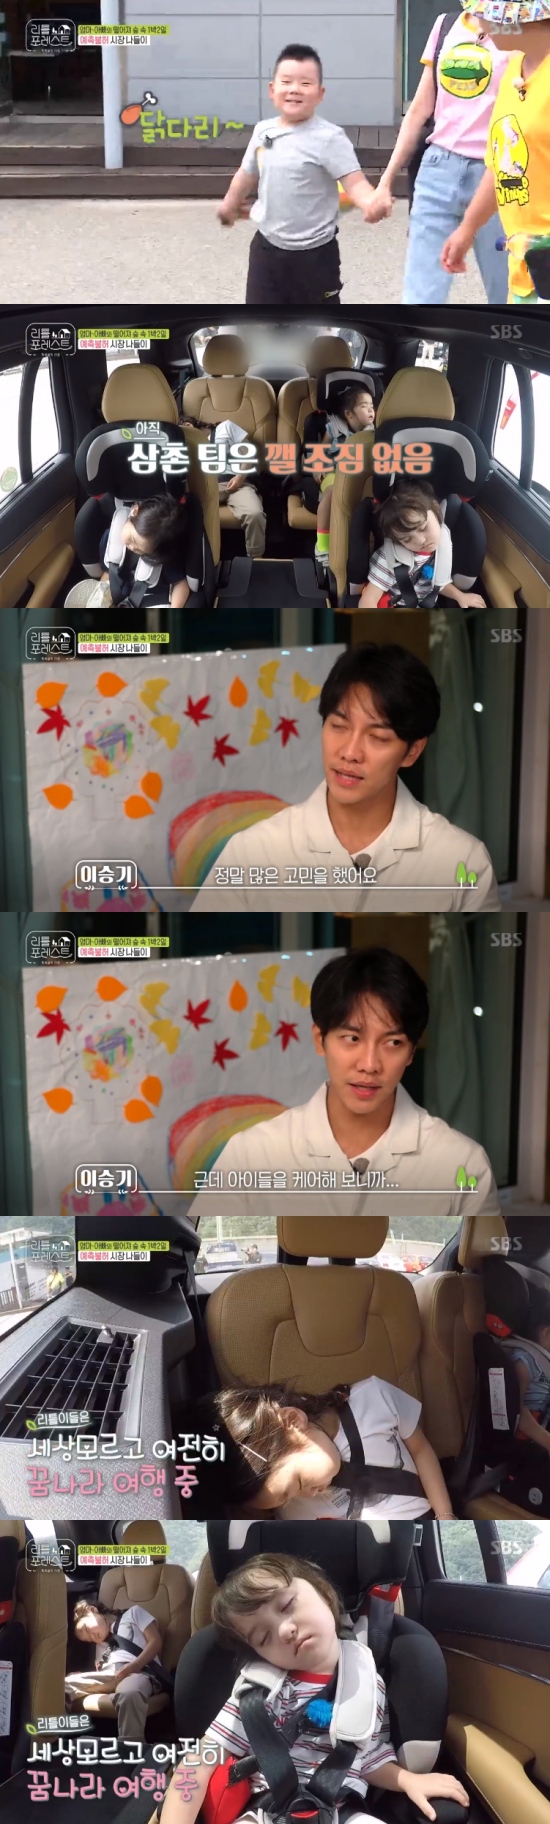 Gag Woman Park Na-rae, singer Lee Seung-gi, Actor Lee Seo-jin and Jung So-min made holiday food for Chuseok.On SBS Little Forest broadcasted on the 17th, Park Na-rae, Lee Seung-gi, Lee Seo-jin and Jung So-min were preparing for the holiday food for Chuseok.On this day, the members went to the market with the children for Chuseok.Park Na-rae and Jung So-min moved with the boys, while Lee Seung-gi and Lee Seo-jin took the girls.However, the children fell asleep in the car and embarrassed the members.The production team asked, How many percent of the plans are in Little Forest? Lee Seung-gi said, This is real parenting. This is reality.When I care for my children, I wake them when I sleep or when I am tired, I feel very tired. I decided that I could not let them see the market as we wanted. Park Na-rae and Jung So-min woke up Lee Han-gun and Yejun-gun and started to see the market.Lee Seung-gi and Lee Seo-jin, on the other hand, decided to take the children to the restaurant and put them to bed, and Lee Seung-gi was sweating to find a restaurant where they could sit down.Eventually, Lee Seo-jin and Lee Seung-gi put their sleeping children to bed in the dining room, while Miss Grace, Miss Eugene and Ms Gaon opened their eyes first.Lee Seung-gi found a rice cake with three children, and the children boasted of their extraordinary food by eating honey on rice cake.Furthermore, the members purchased holiday food ingredients and provided opportunities for children to calculate.The members then prepared holiday food as soon as they returned to the hostel, when Ms. Gaon gave her a gathering at the chicken coop and she was unable to help the chicken escape.Yejun and Lee Han urgently called Lee Seung-gi, and Lee Seung-gi headed to the chicken coop late.Lee Seung-gi helped Lee Han-gun and let the chickens into the chicken coop.Lee Seung-gi also expressed his extraordinary confidence by making Songpyeon, saying, If you make Songpyeon pretty, what do you say you give birth to (among your son and daughter)?In addition, the children enjoyed the holiday food made by the members and made a warm heart.Photo = SBS Broadcasting Screen